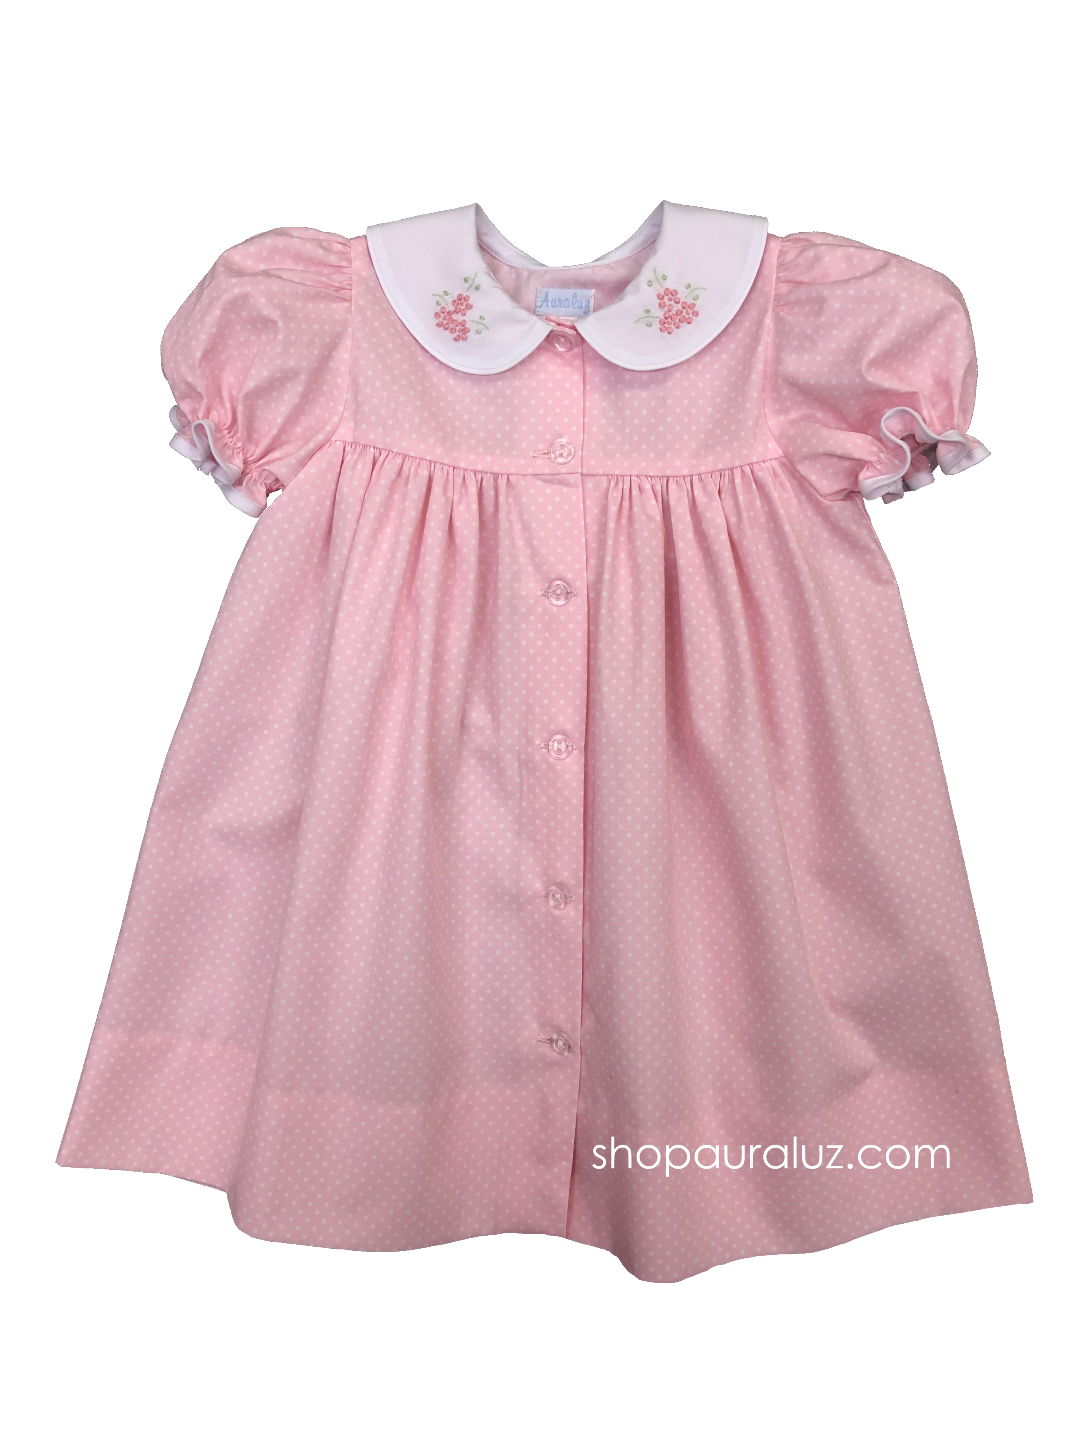 Auraluz Dress...Pink/white polka dots, button-front, white p.p. collar and embroidered flowers-STORE EXCLUSIVE!